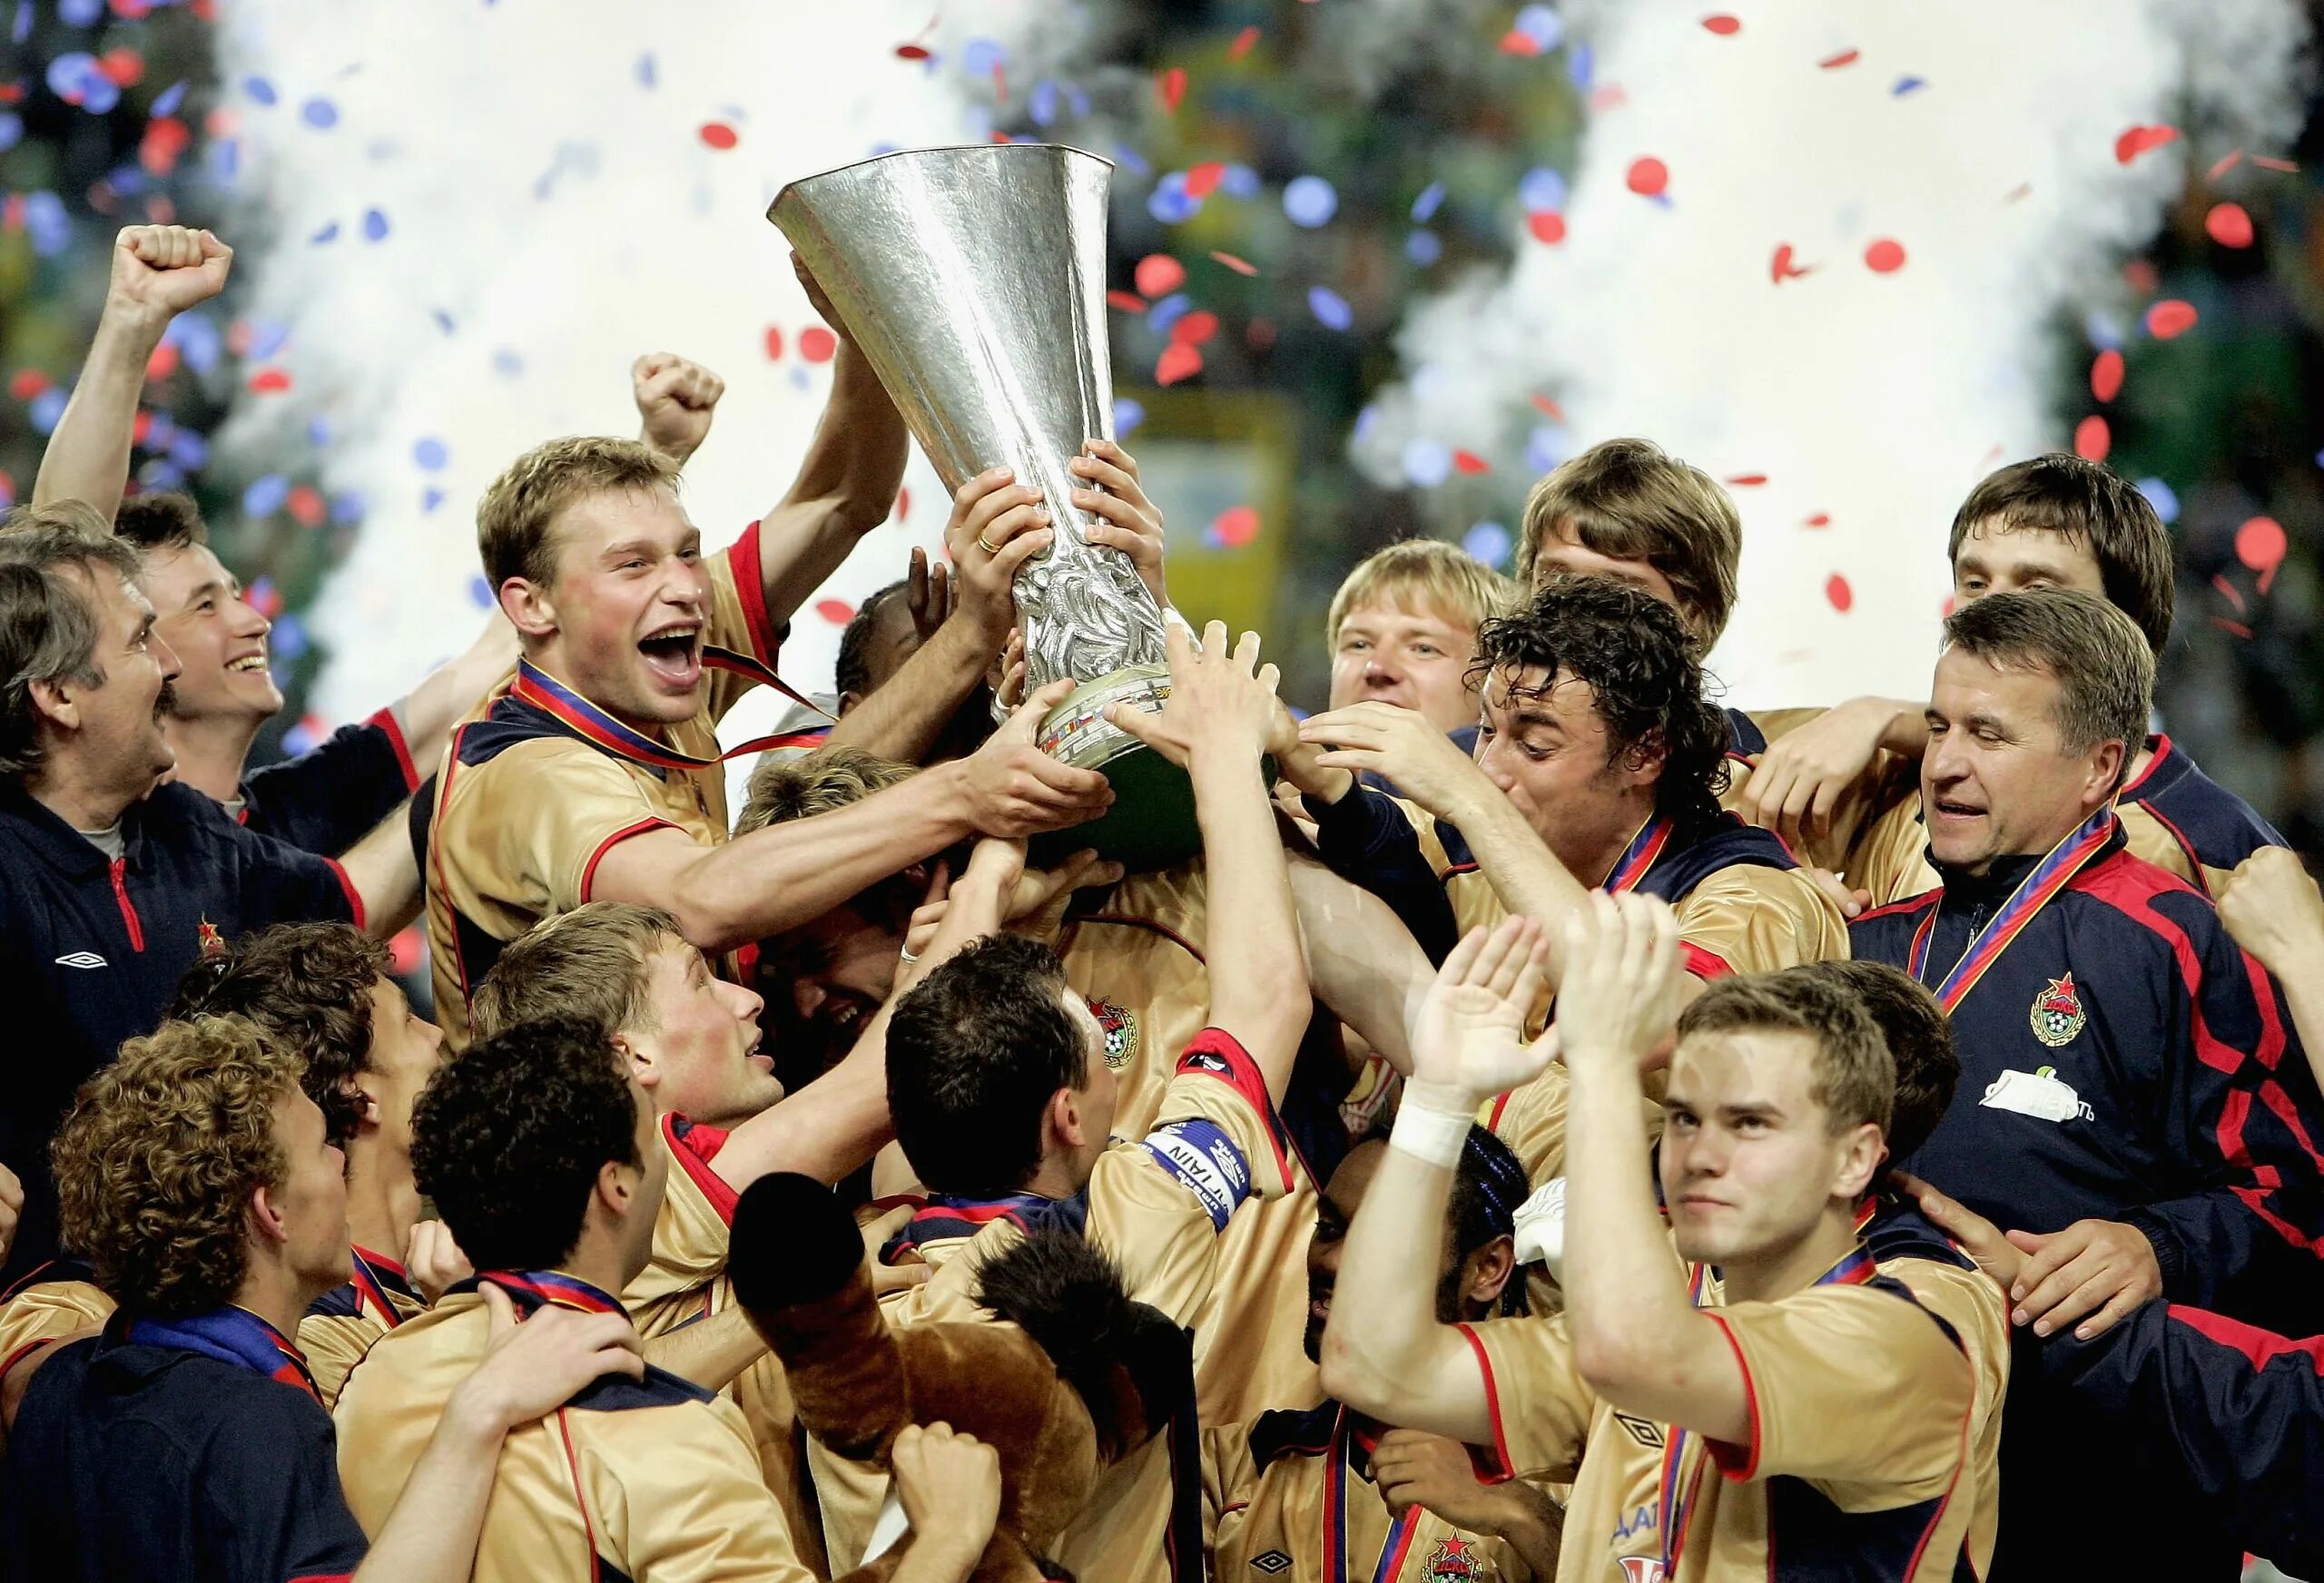 Uefa cup. ЦСКА Кубок УЕФА 2005. ЦСКА Кубок УЕФА 2005 команды. ЦСКА чемпион УЕФА 2005.